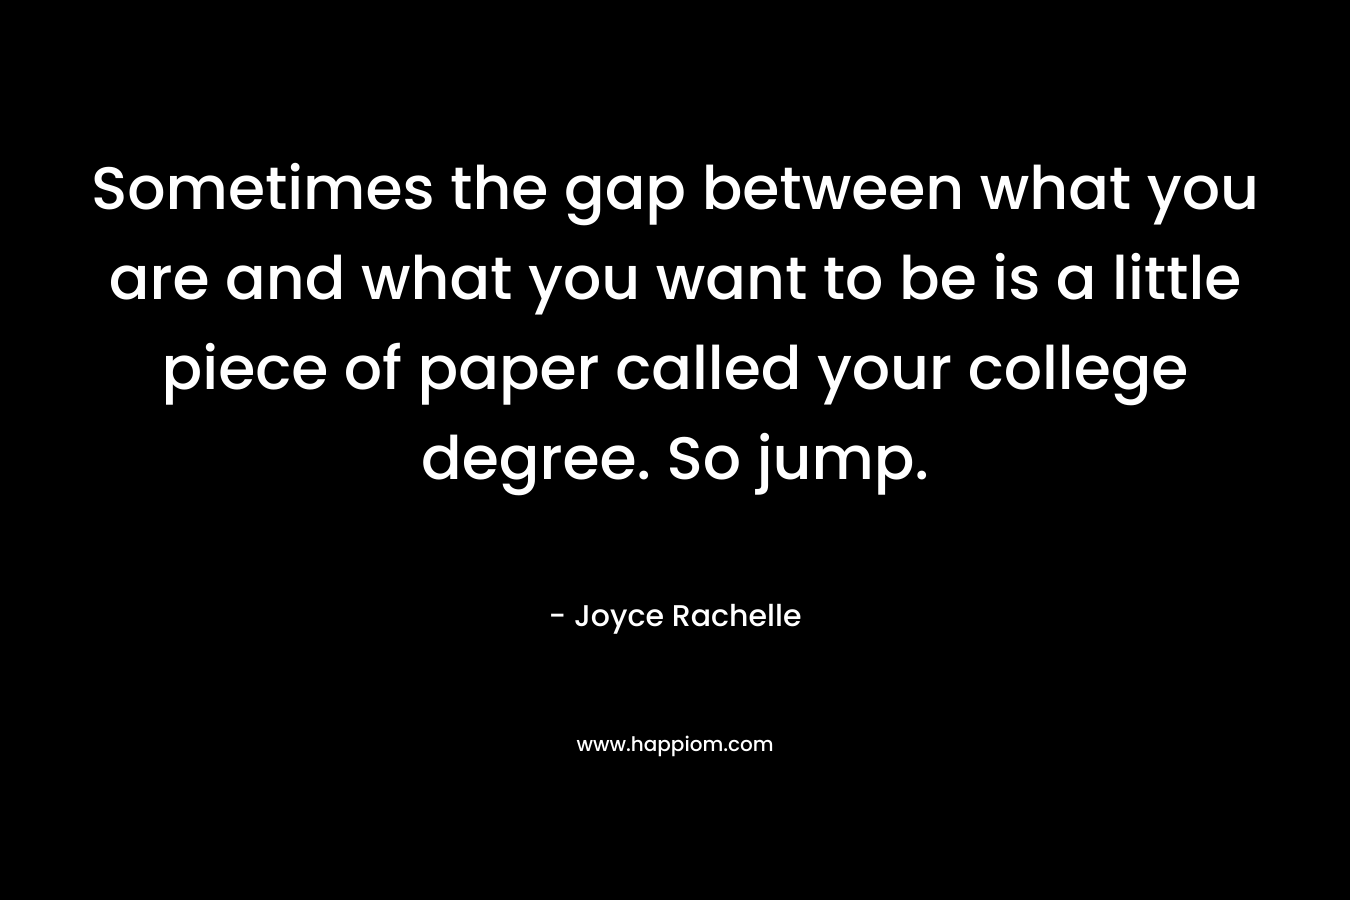 Sometimes the gap between what you are and what you want to be is a little piece of paper called your college degree. So jump.